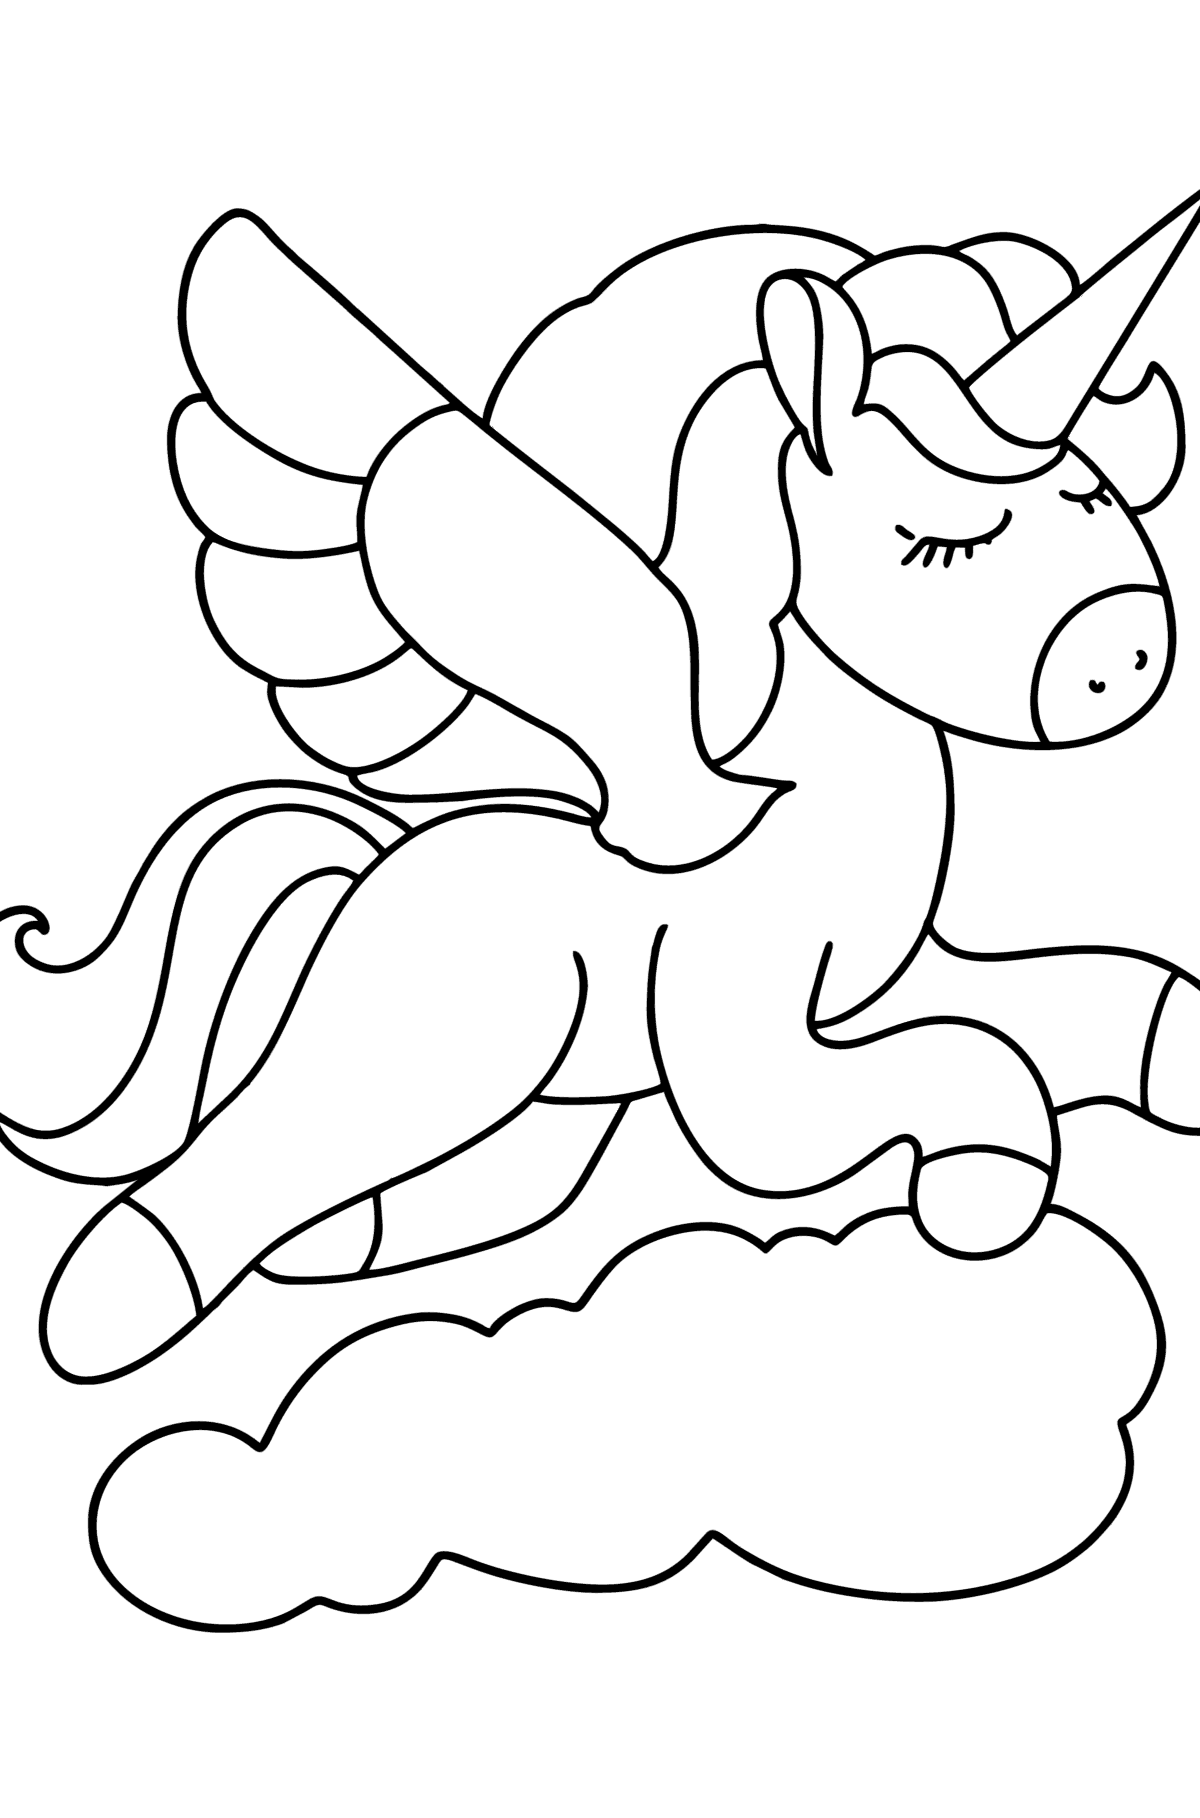 Unicorn with wings coloring page ♥ Online and Print for Free